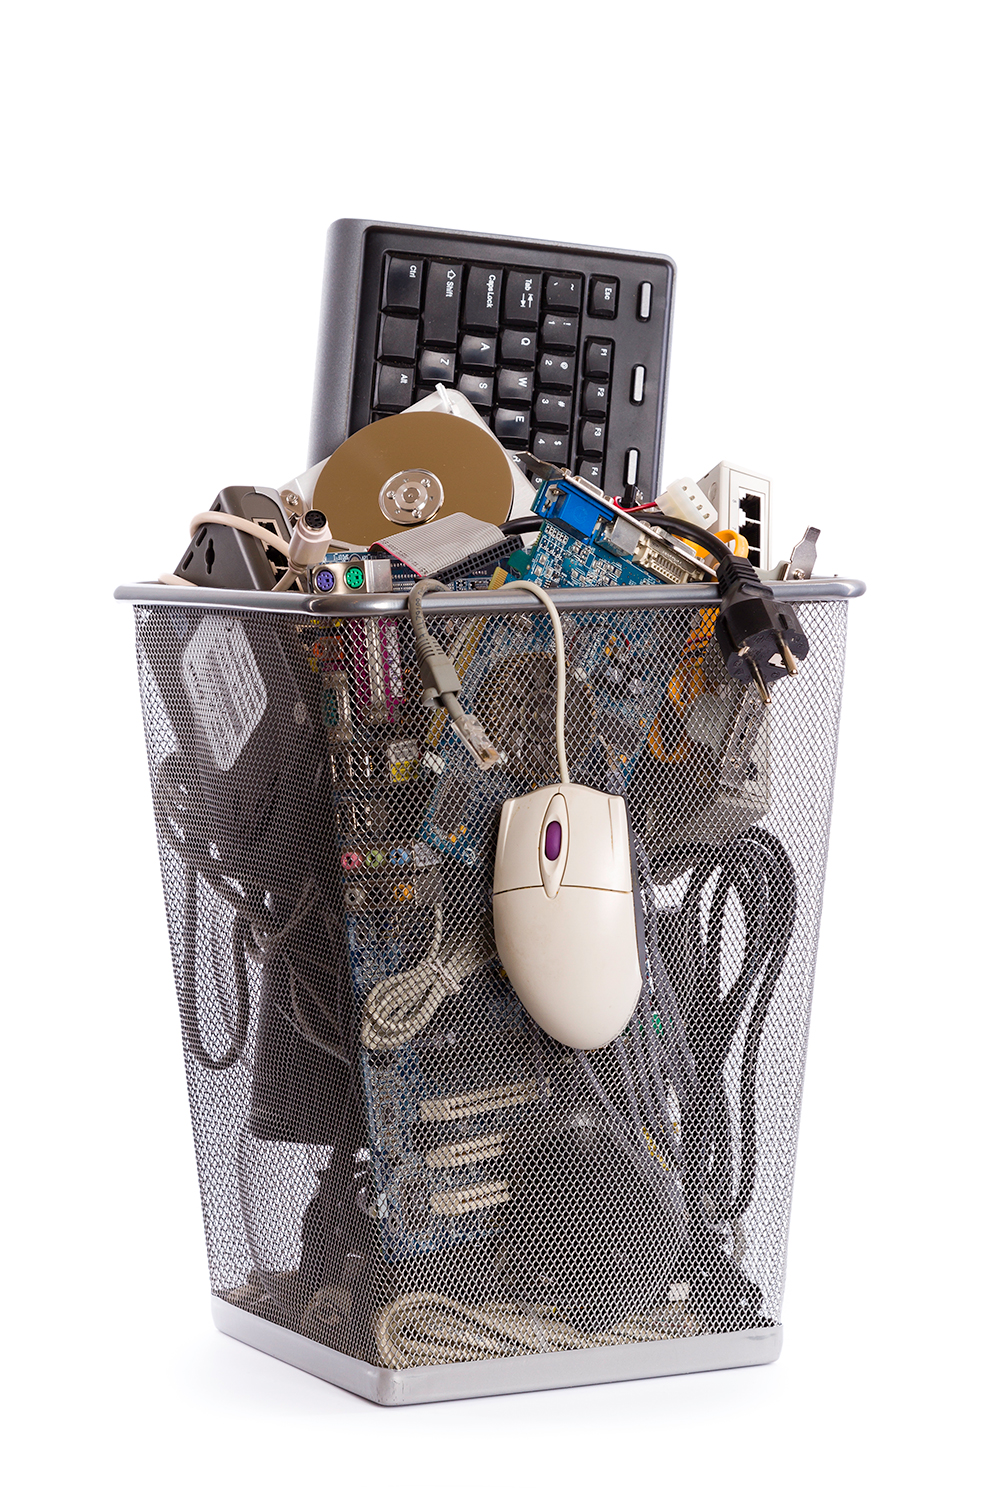 electronic waste is recycled